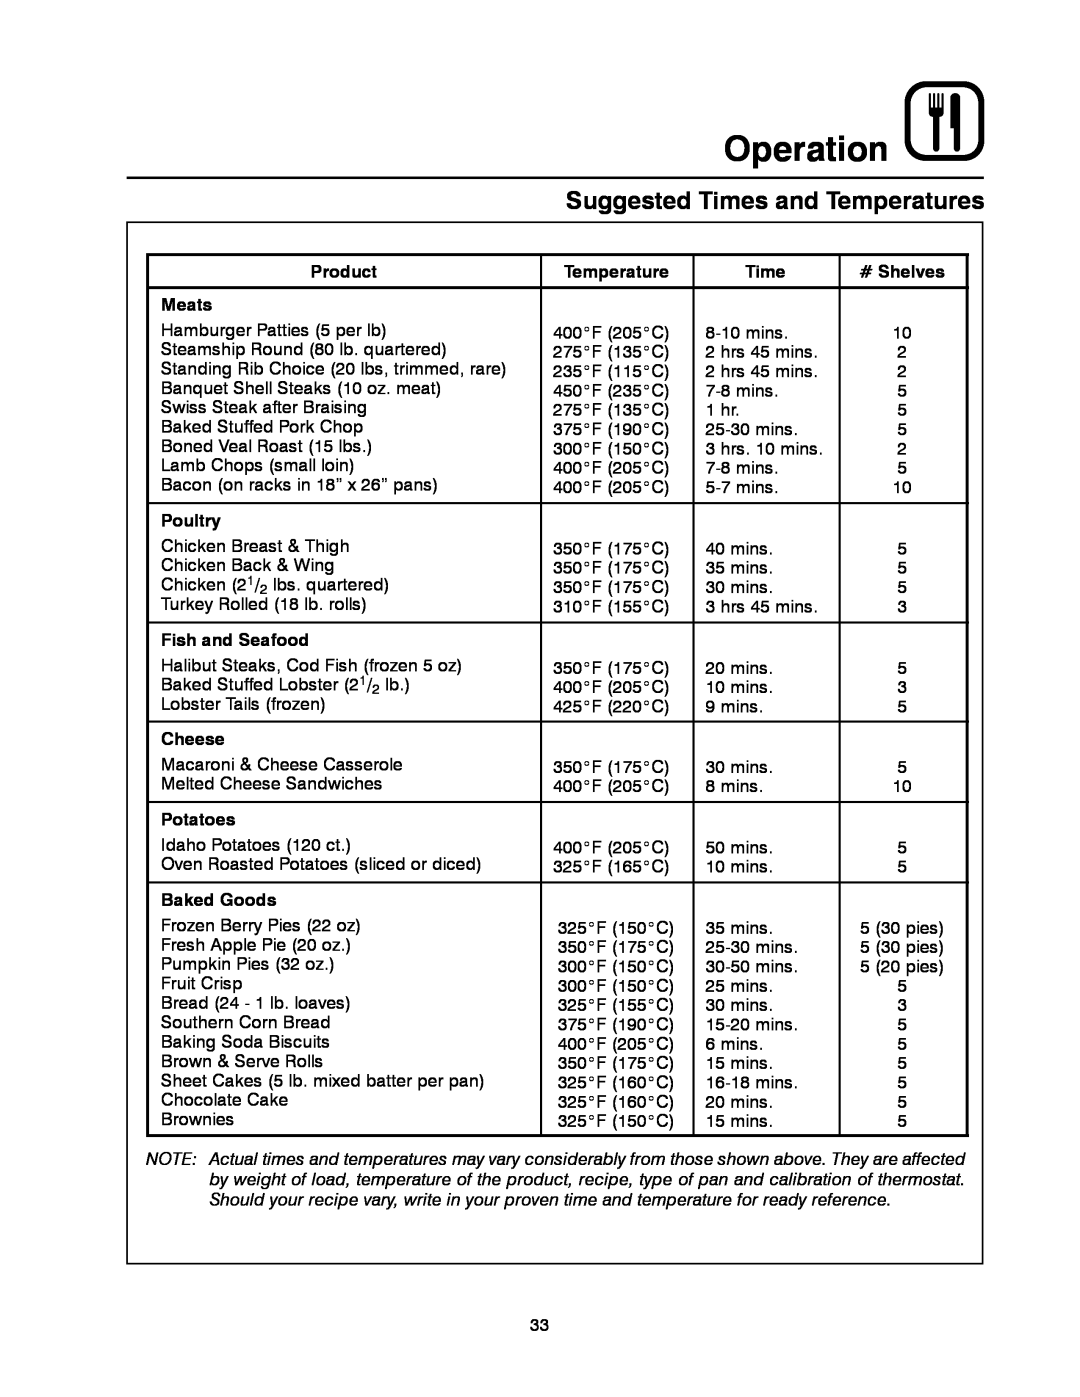 Blodgett MARK V Operation, Suggested Times and Temperatures, Product, # Shelves, Meats, Poultry, Fish and Seafood, Cheese 